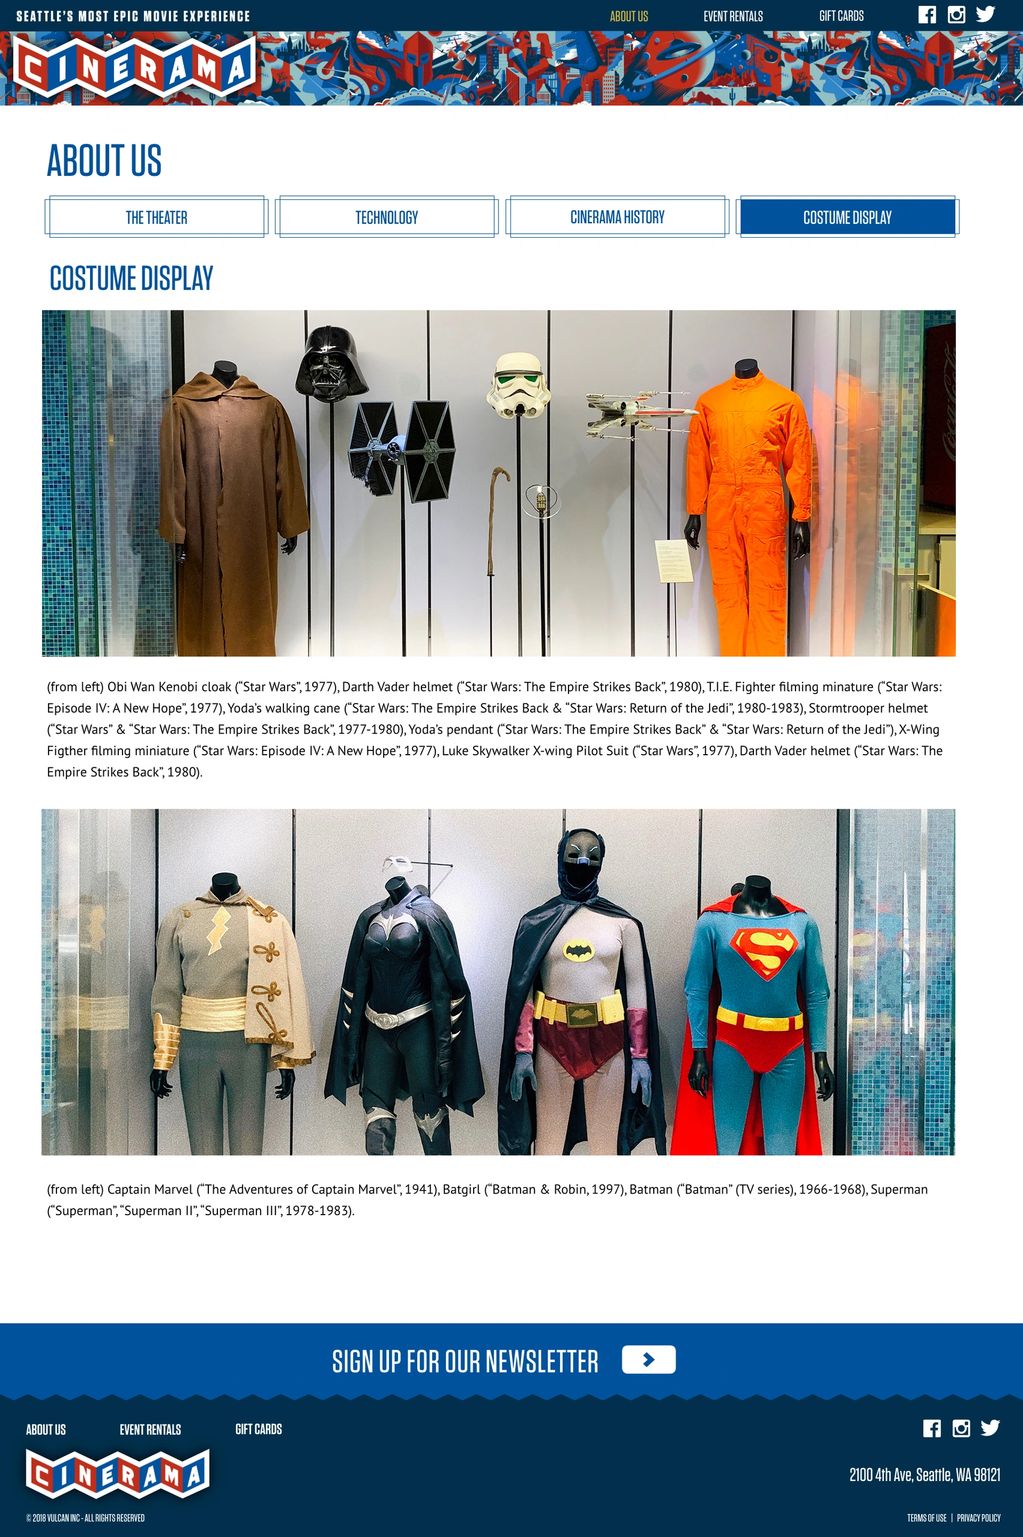 Costumes from movies showcased at Cinerama.